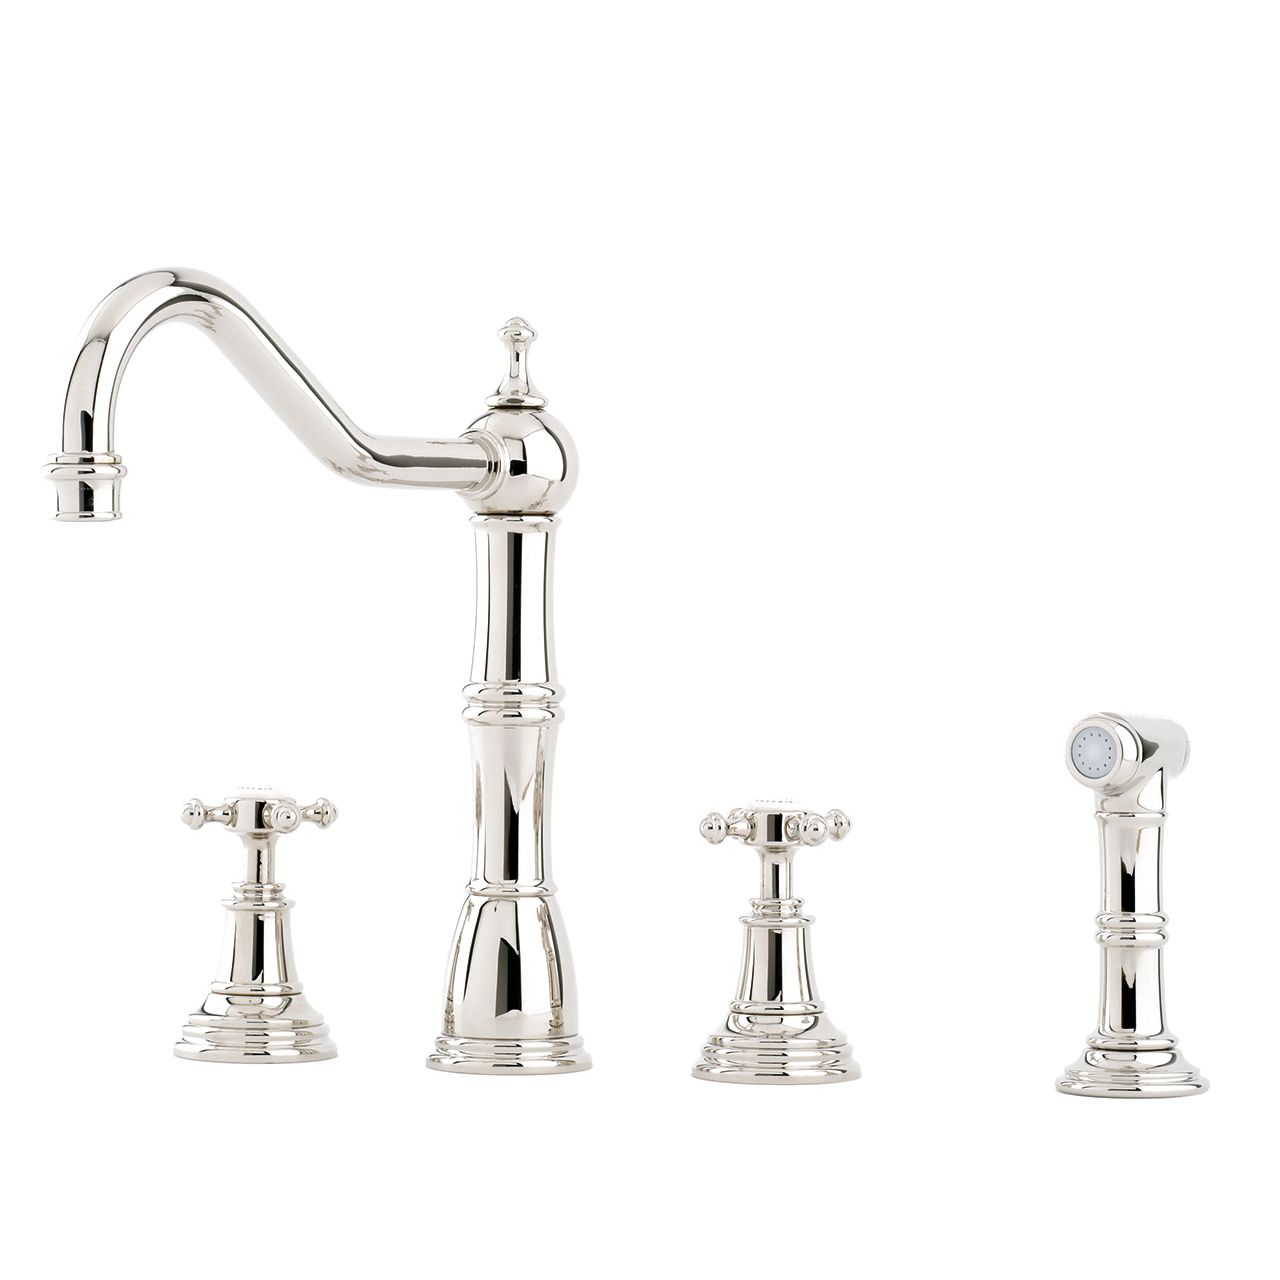 Perrin &amp; Rowe Alsace Mixer Tap with Crosstop Handles and Rinse